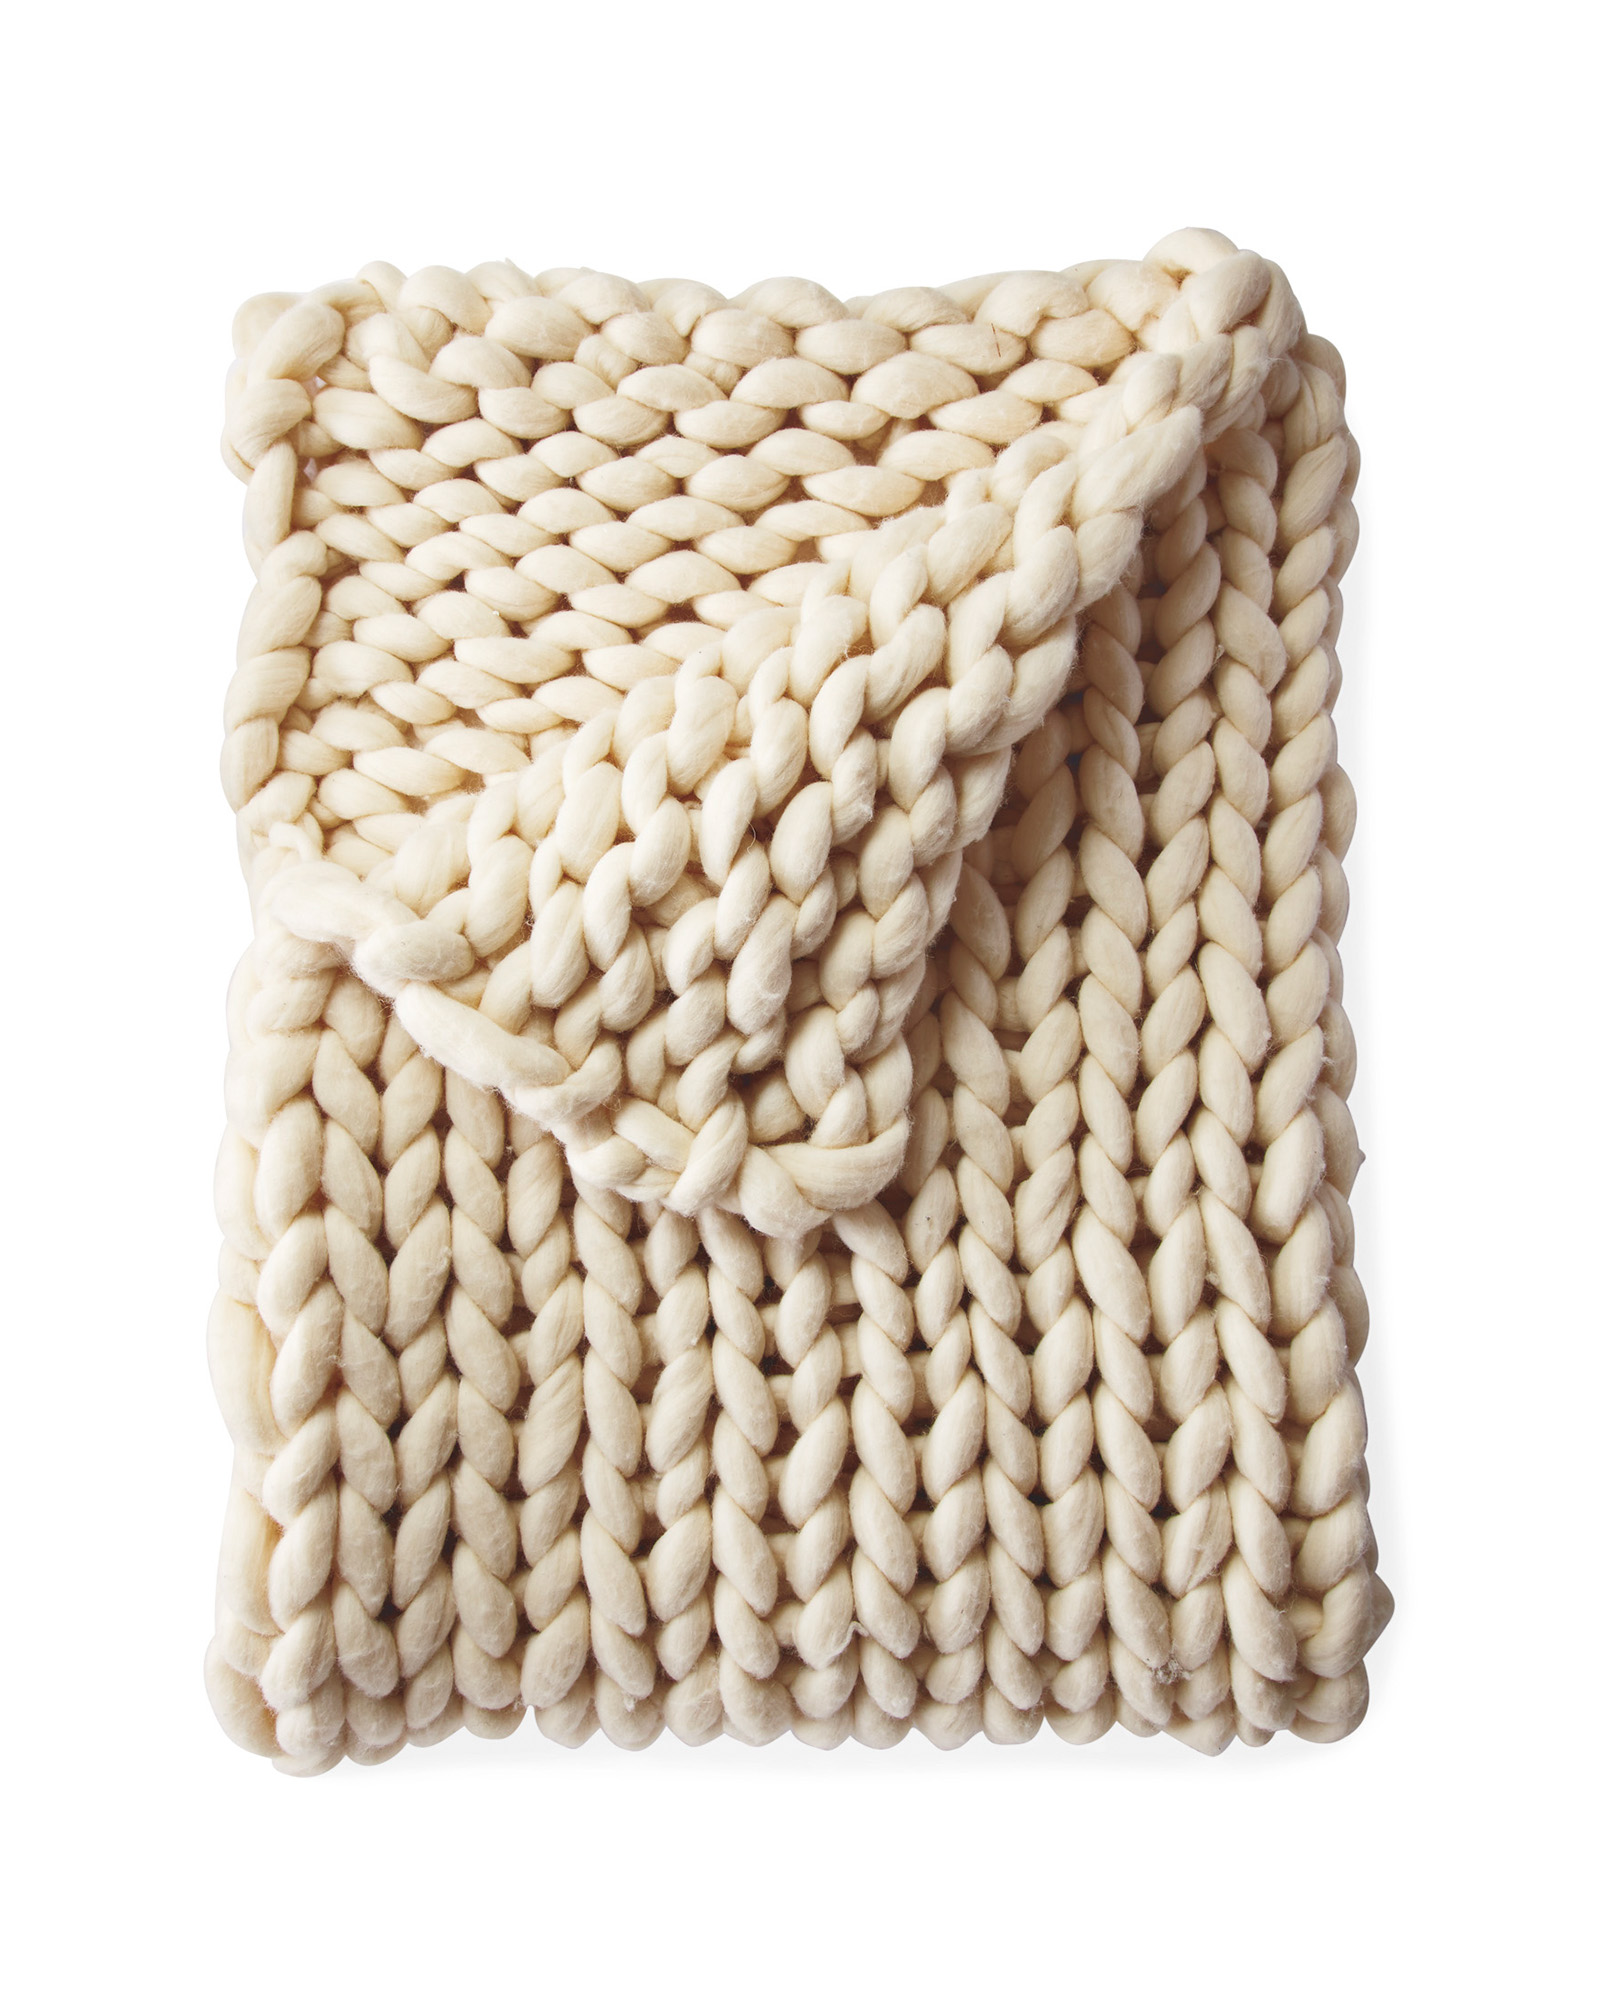 Henley Wool Throw - Serena & Lily